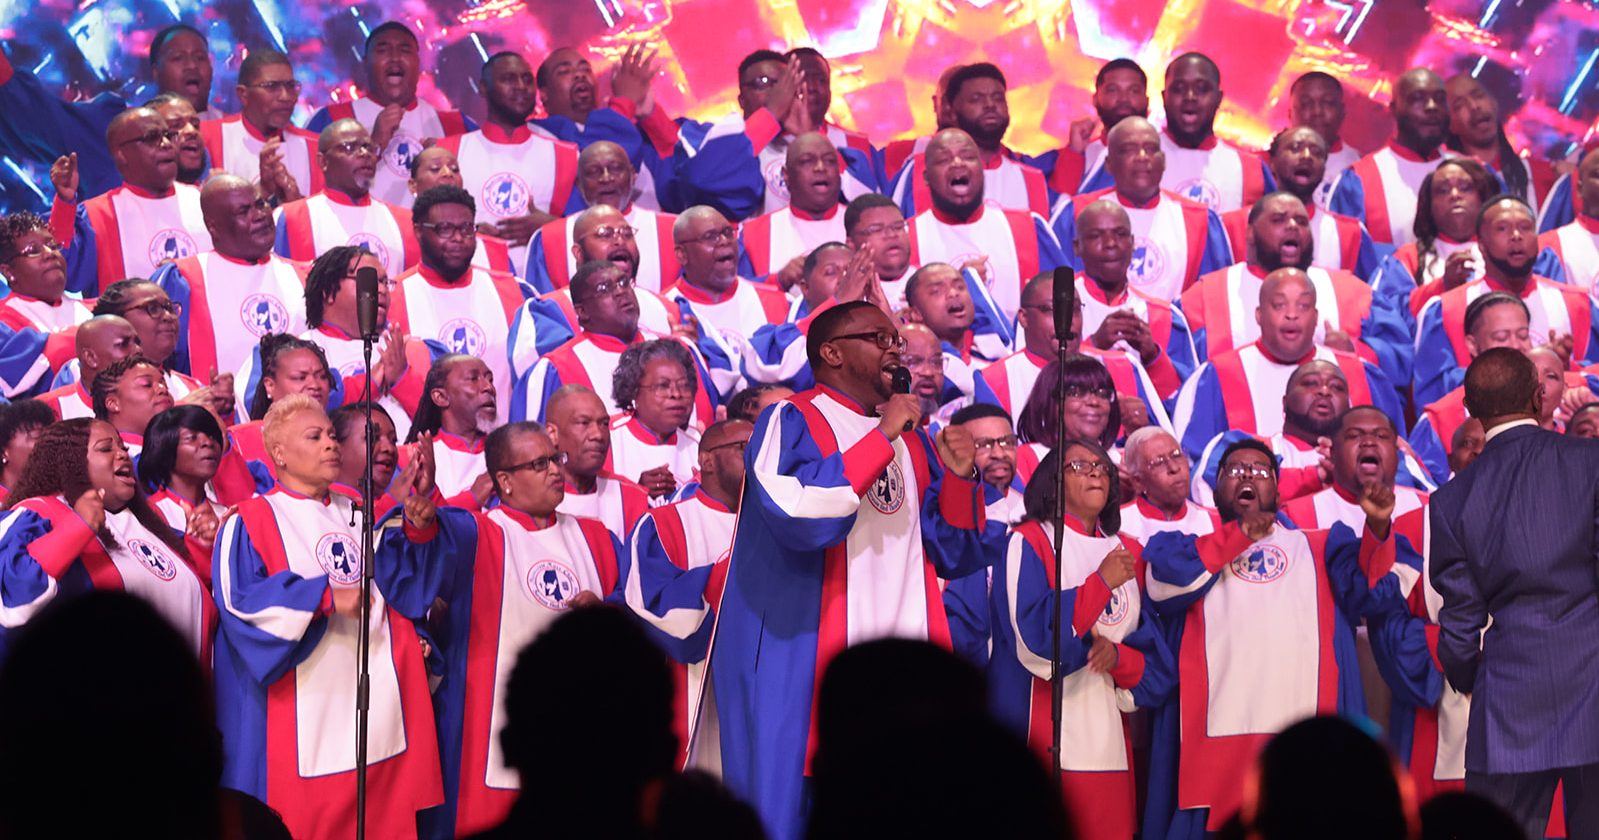 The Mississippi Mass Choir Releases New Single “The Promise”